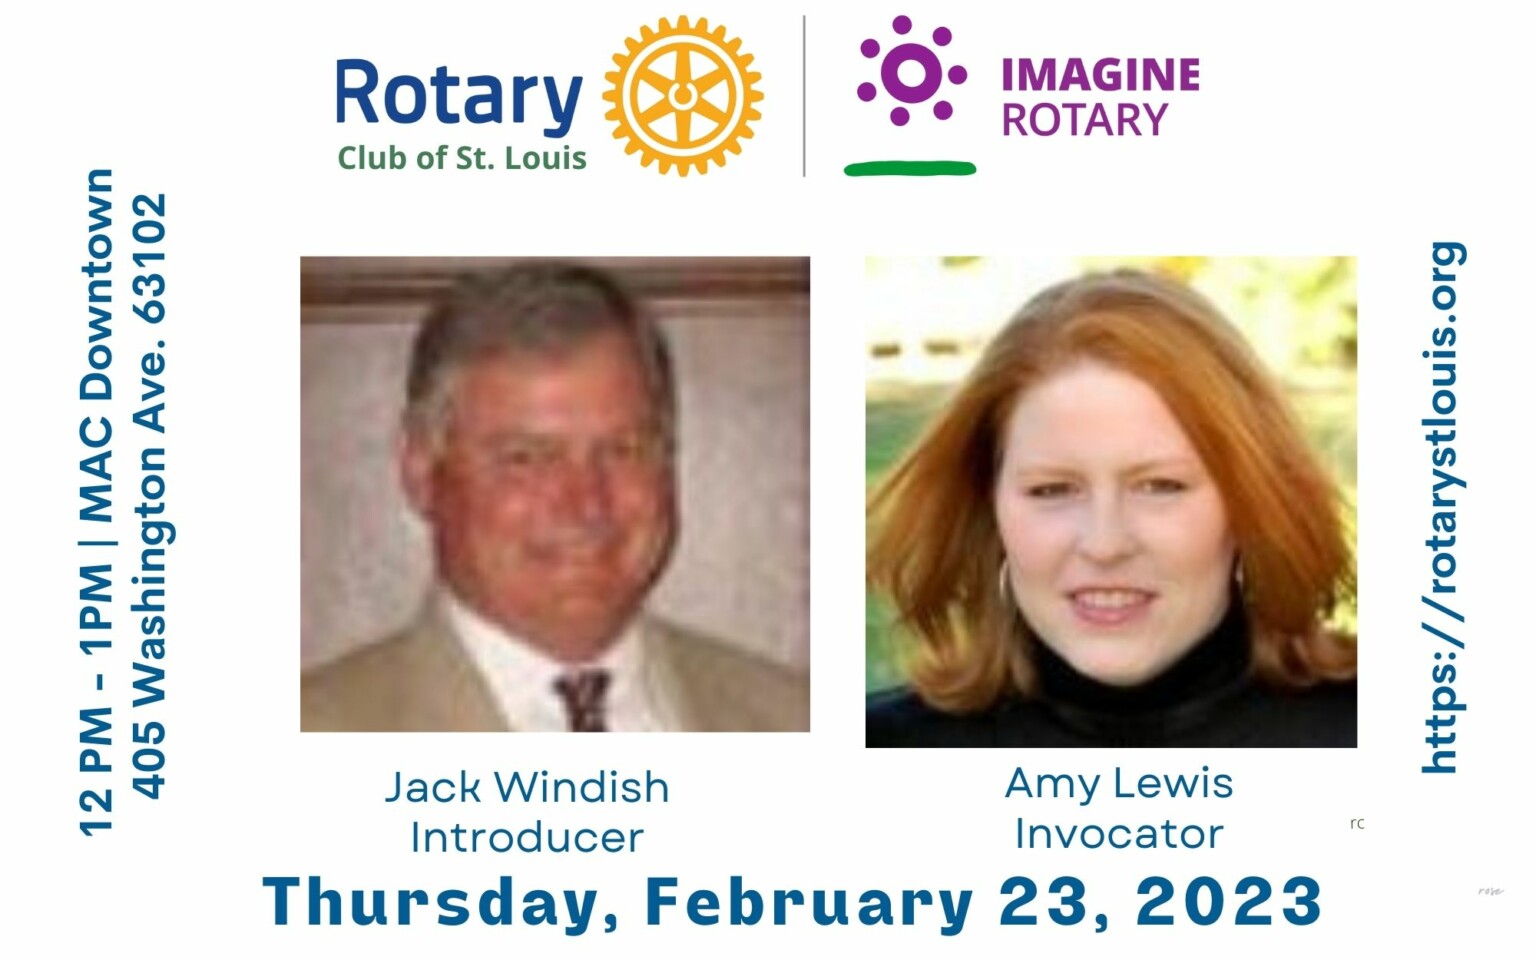 Jack Windish, Introducer and Amy Lewis, Invocator on 2-23-23 at St. Louis Rotary Club